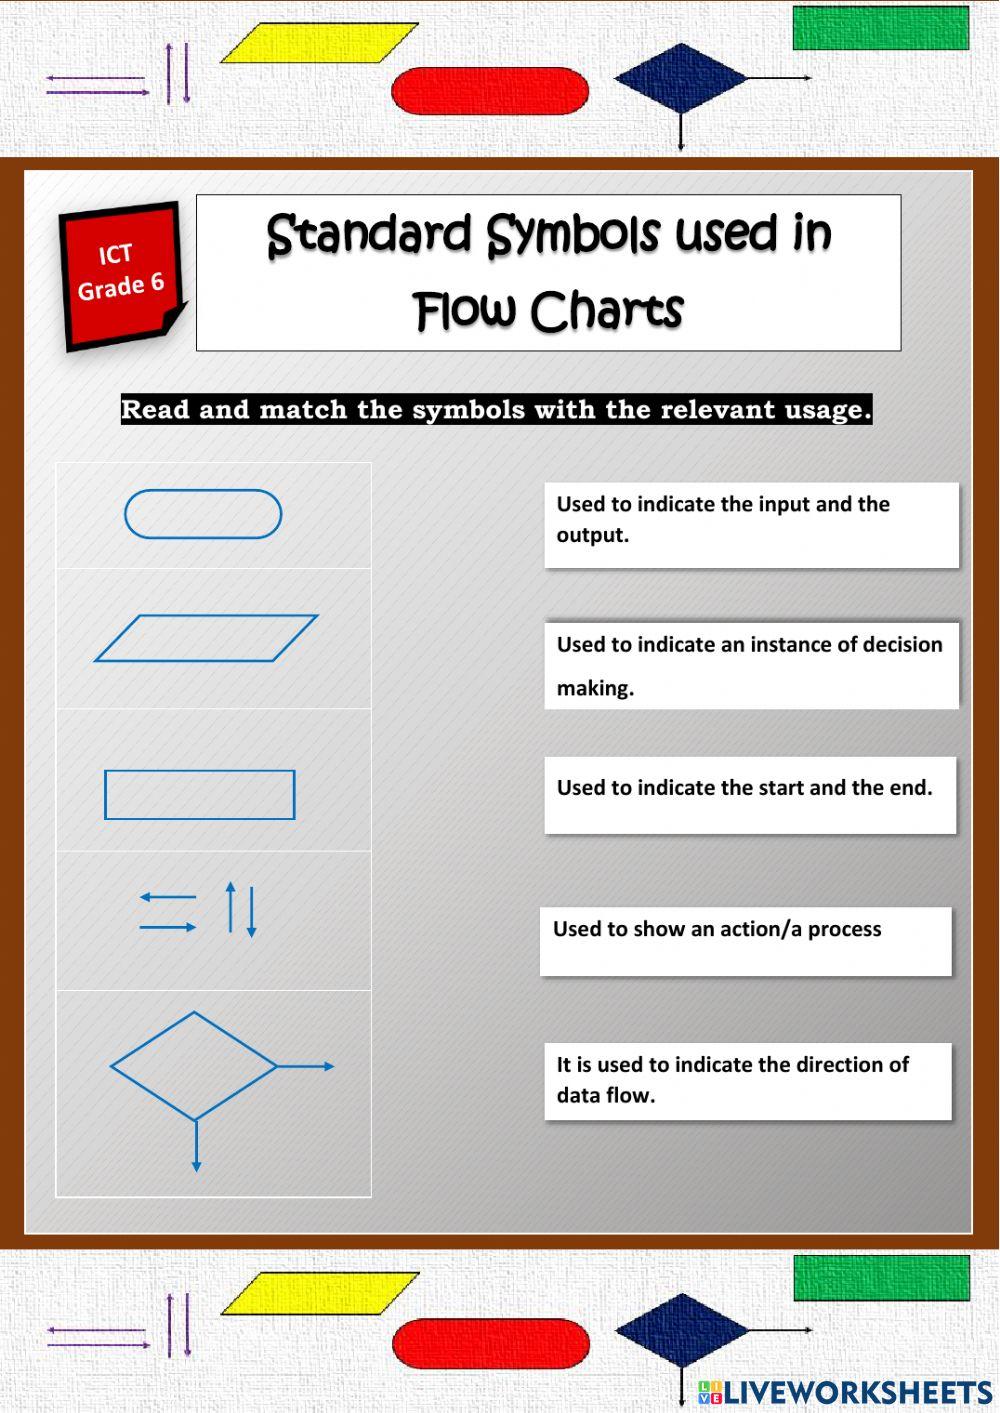 Standard Symbols used in Flow Charts